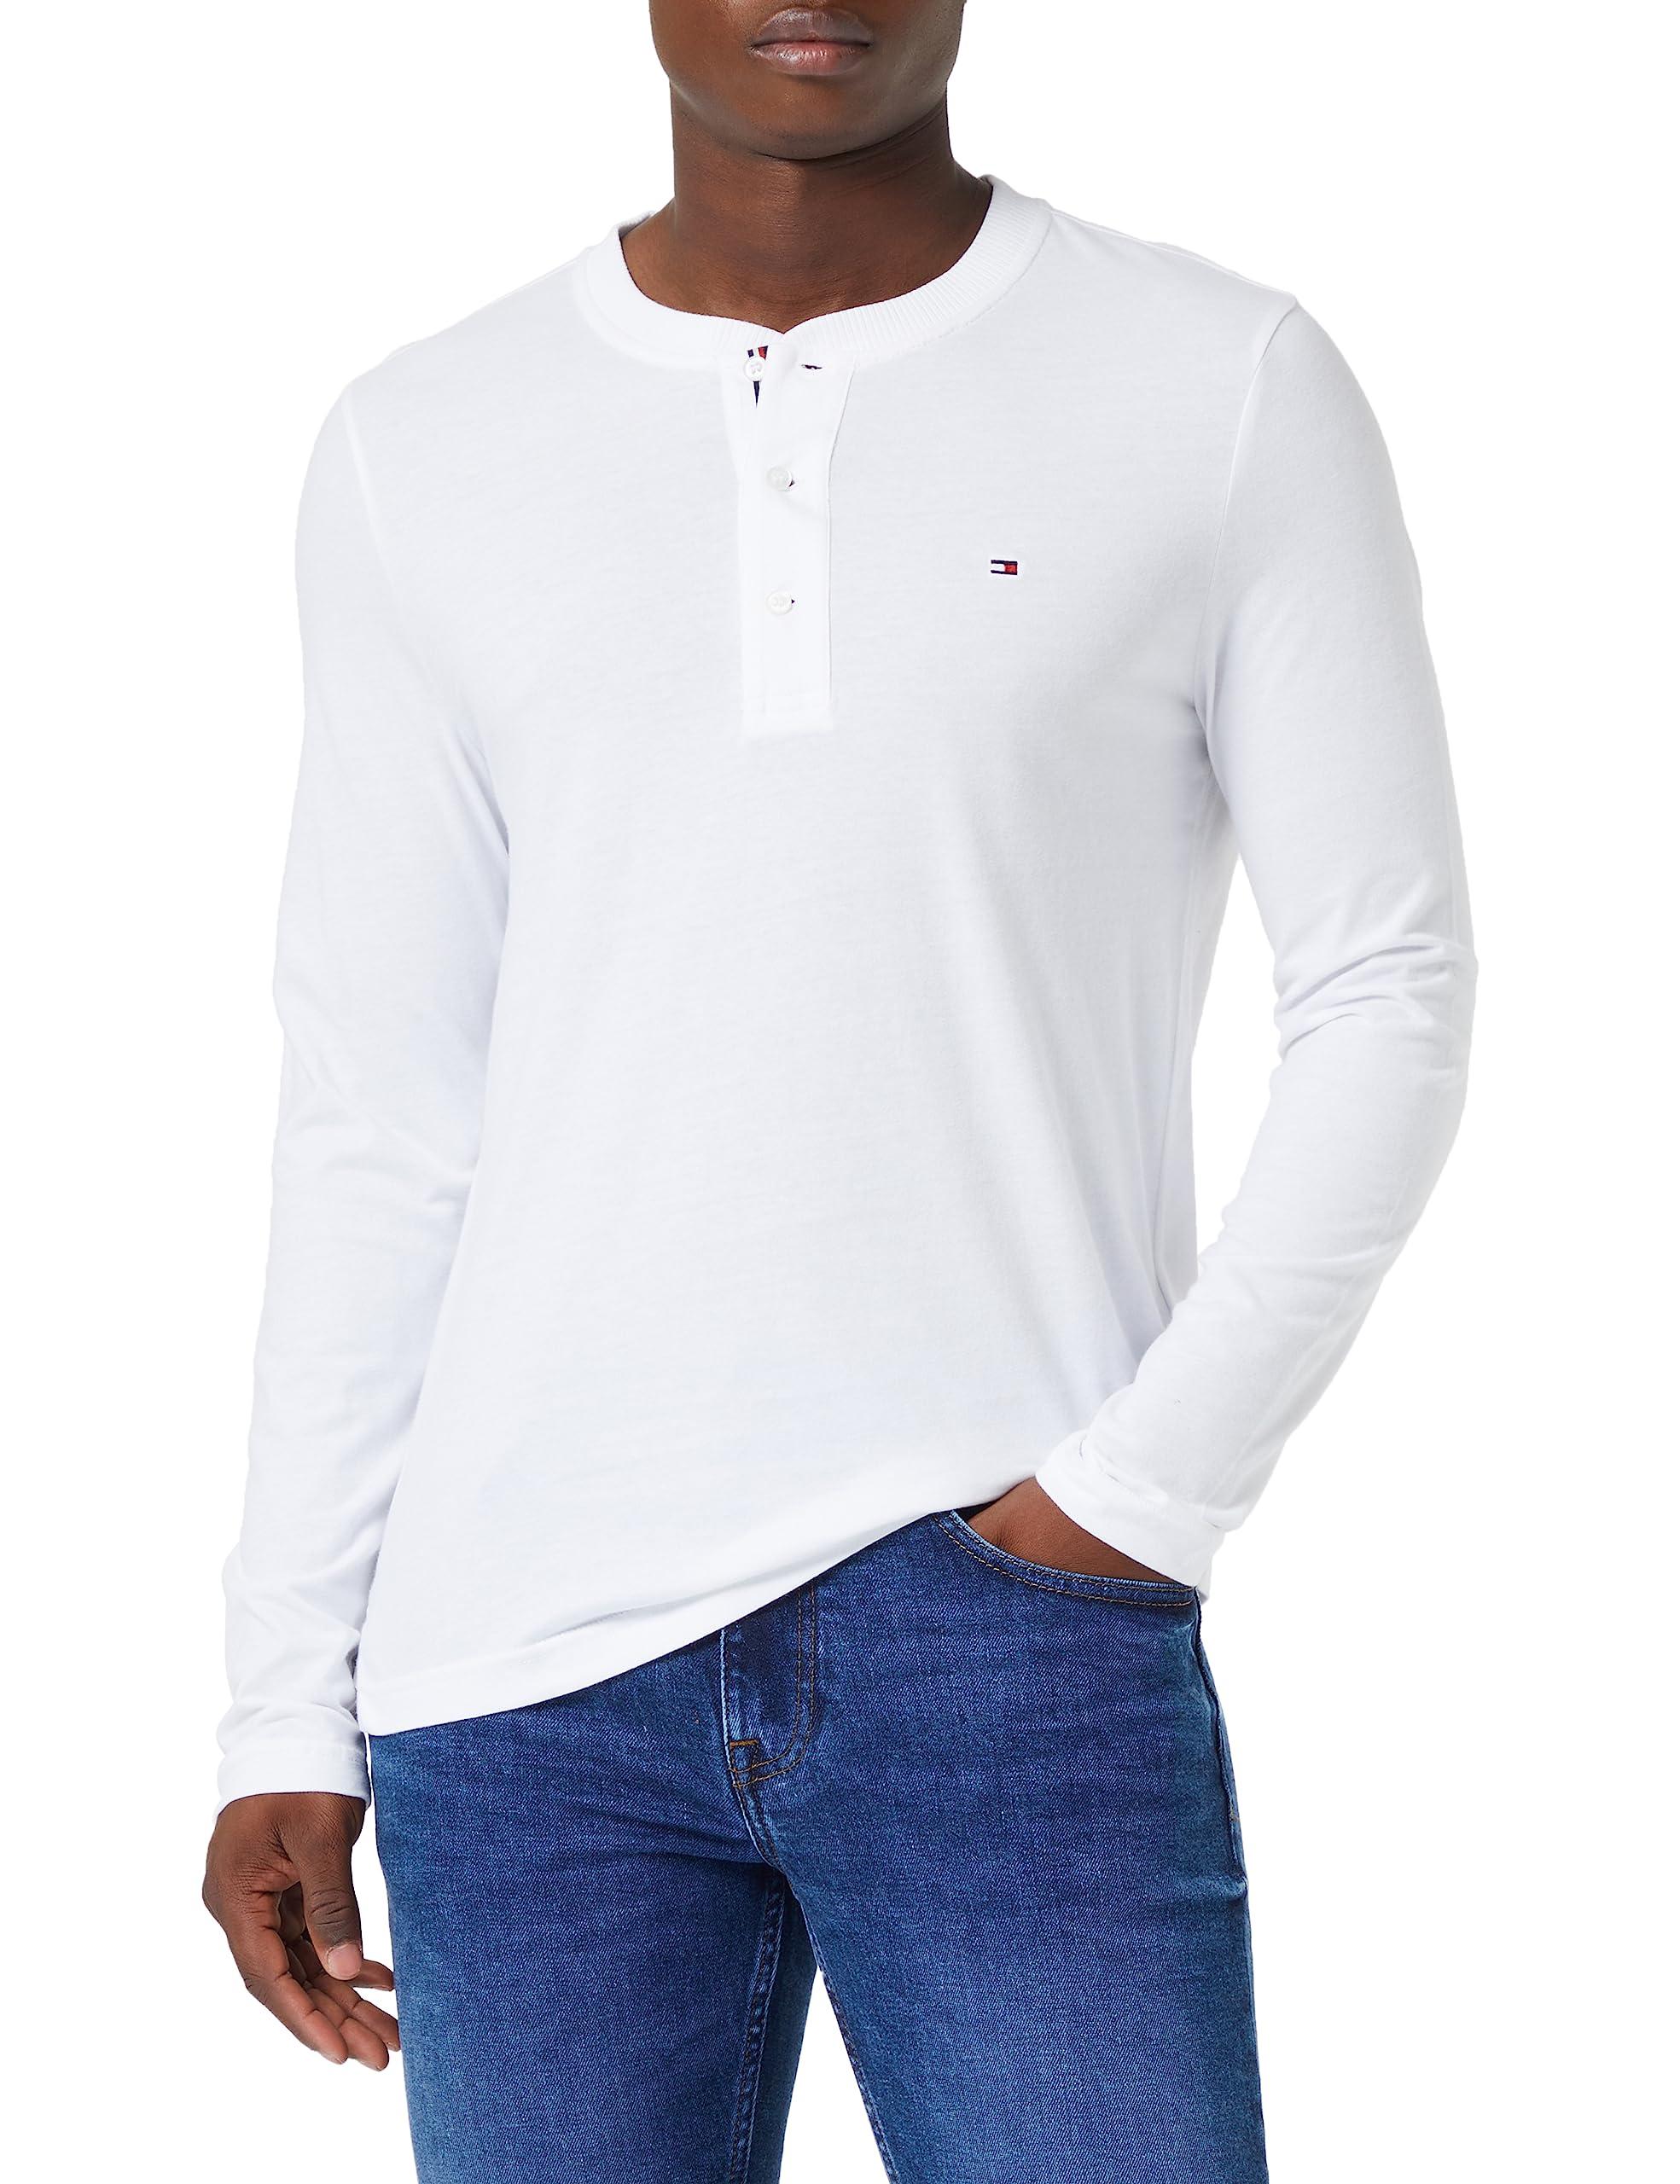 UK | Ls Hilfiger Tee Lyst Men Tommy L/s T-shirts Henley White in for